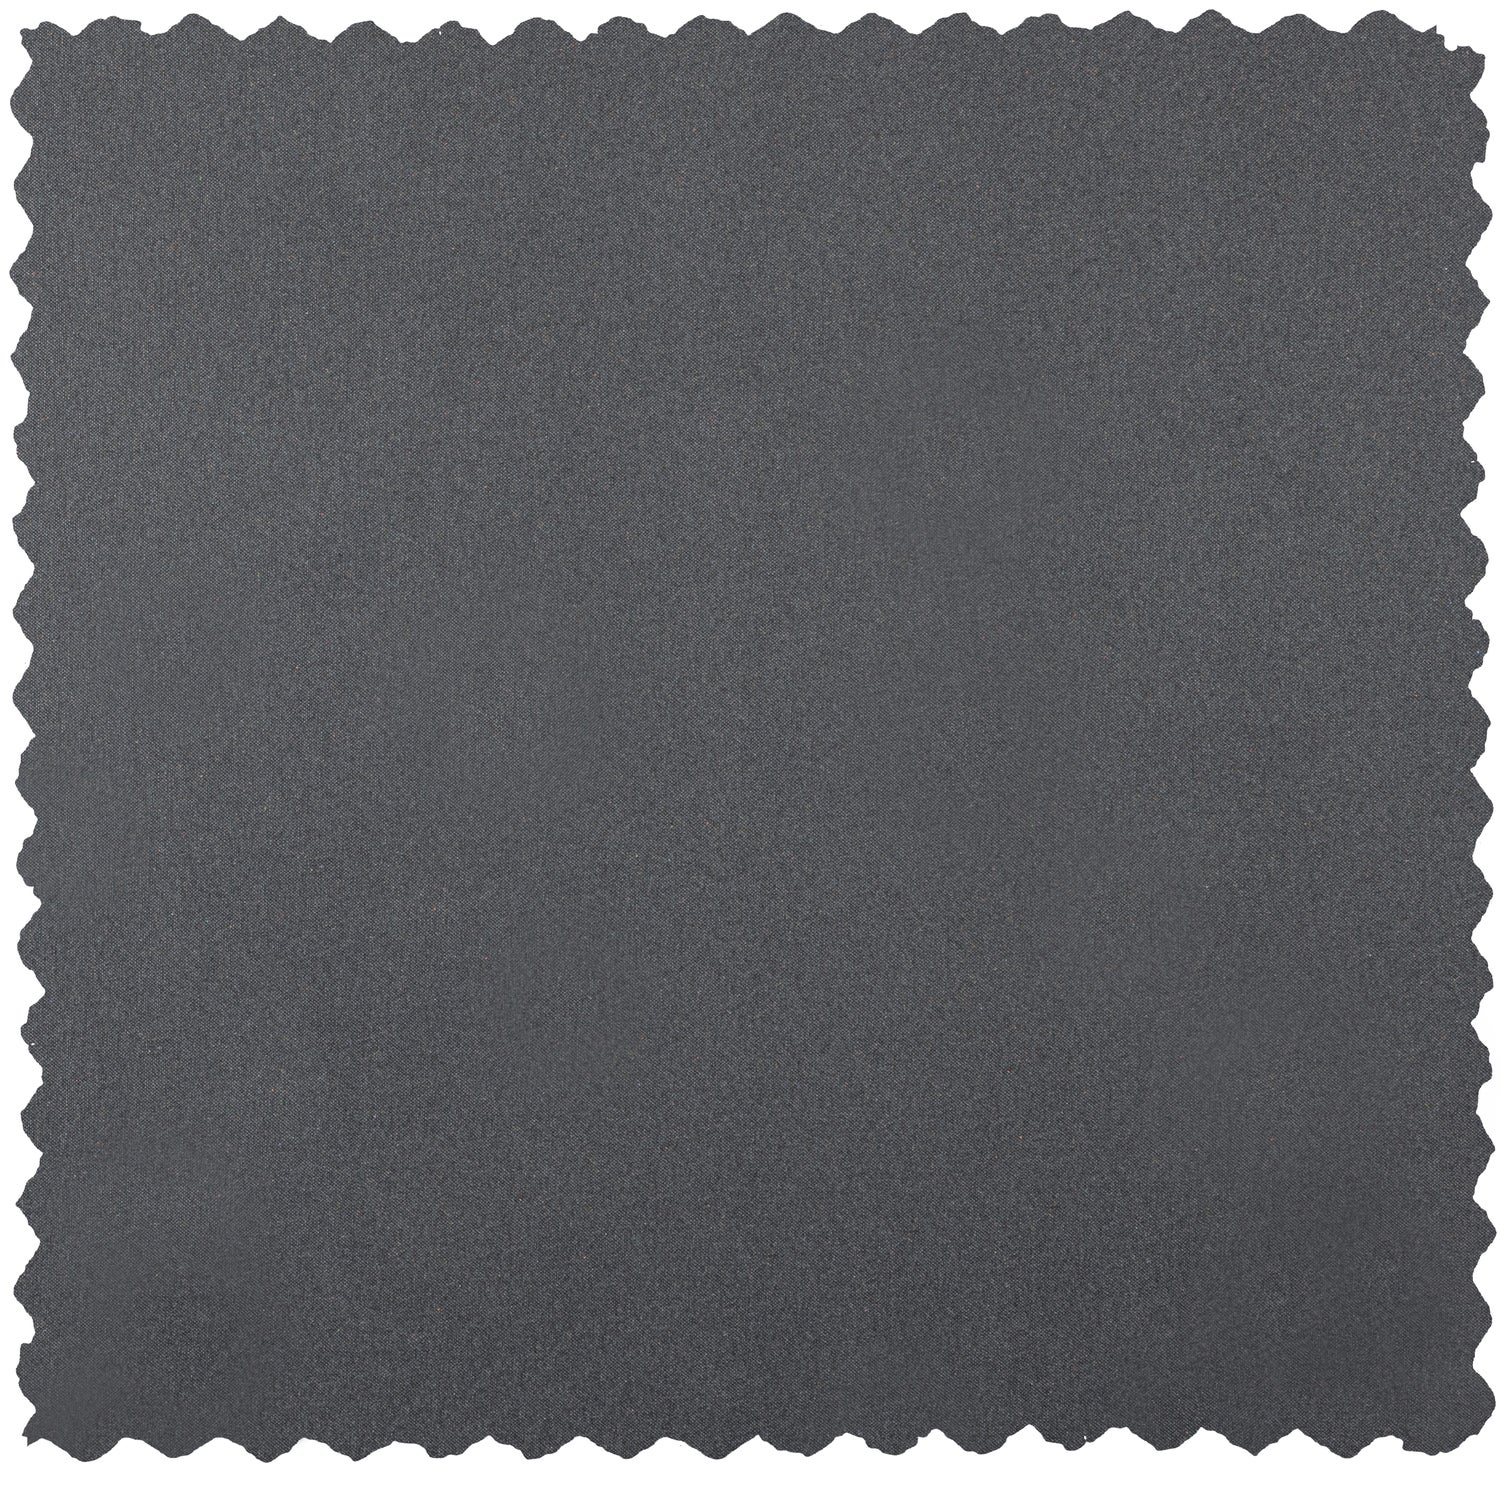 SILVERTEX_9002_CARBON_GREY_SLOPS_ALL_WEATHER.jpg?auto=webp&format=png&width=1500&height=1500